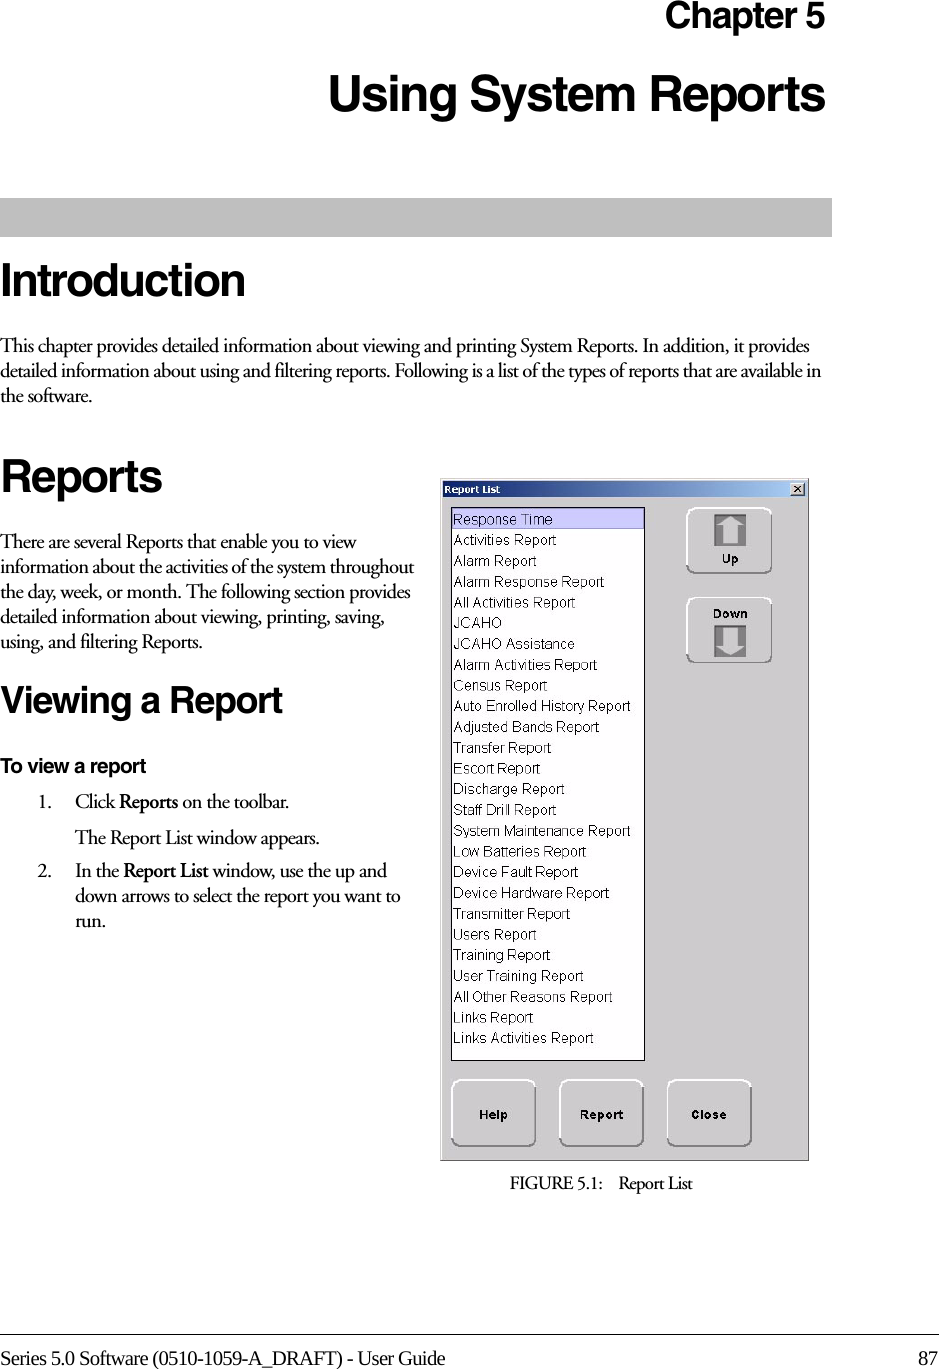 Series 5.0 Software (0510-1059-A_DRAFT) - User Guide 87Chapter 5Using System ReportsIntroductionThis chapter provides detailed information about viewing and printing System Reports. In addition, it provides detailed information about using and filtering reports. Following is a list of the types of reports that are available in the software.ReportsThere are several Reports that enable you to view information about the activities of the system throughout the day, week, or month. The following section provides detailed information about viewing, printing, saving, using, and filtering Reports.Viewing a ReportTo view a report1.    Click Reports on the toolbar.The Report List window appears. 2.    In the Report List window, use the up and down arrows to select the report you want to run.FIGURE 5.1:    Report List